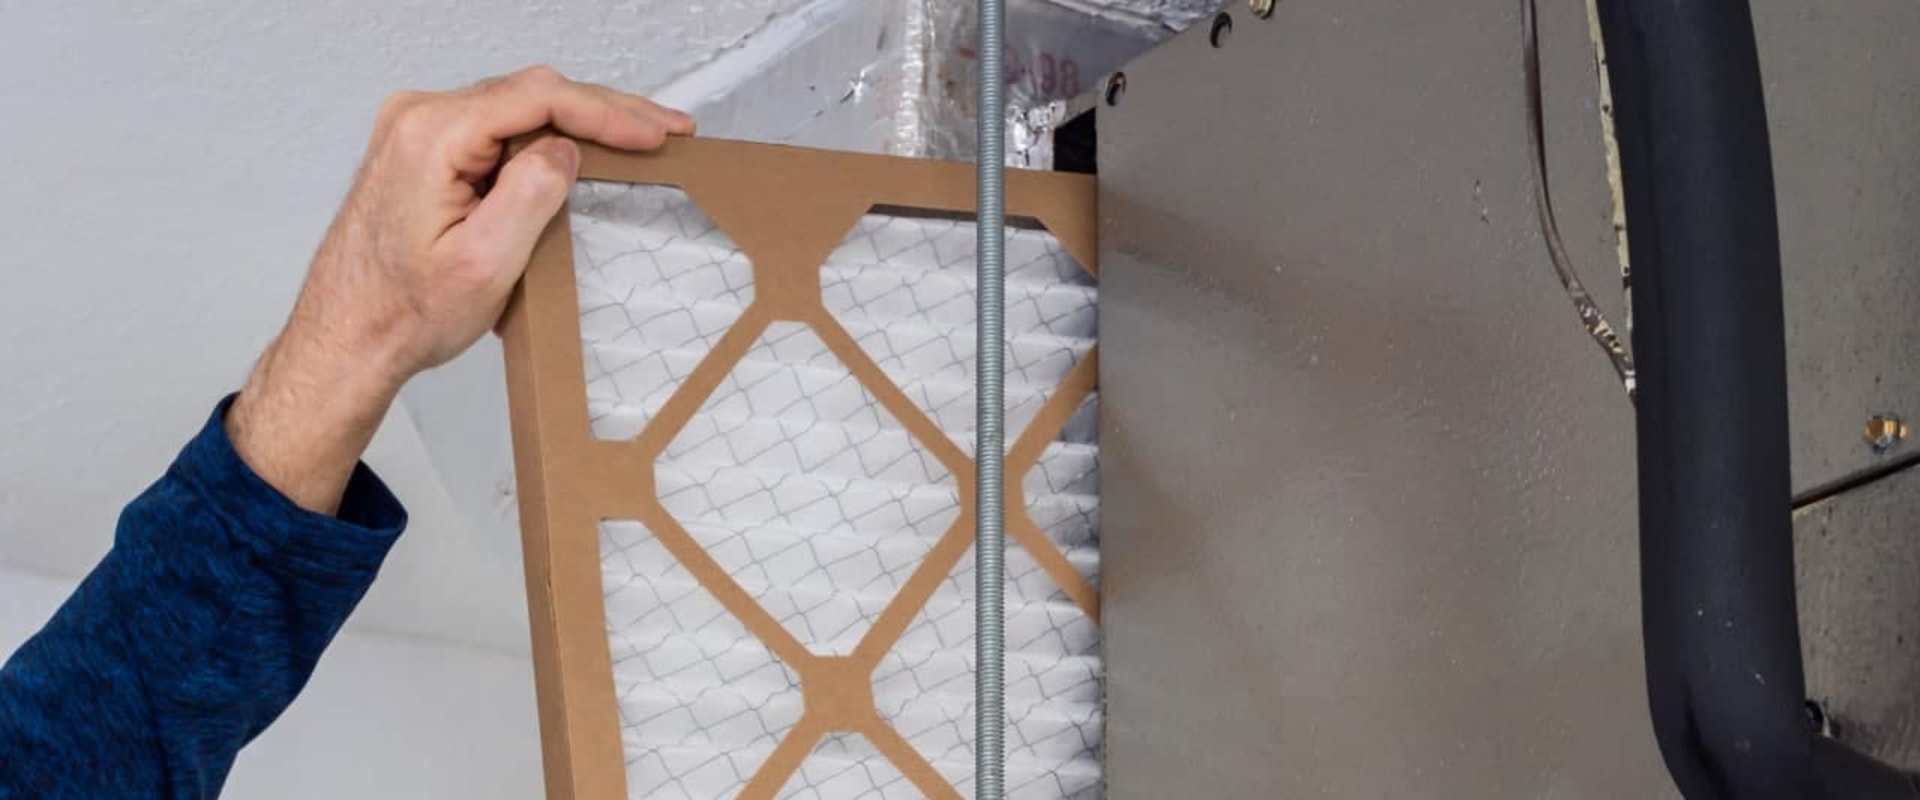 How Often Should You Change Your Furnace Filter 16x25x4?